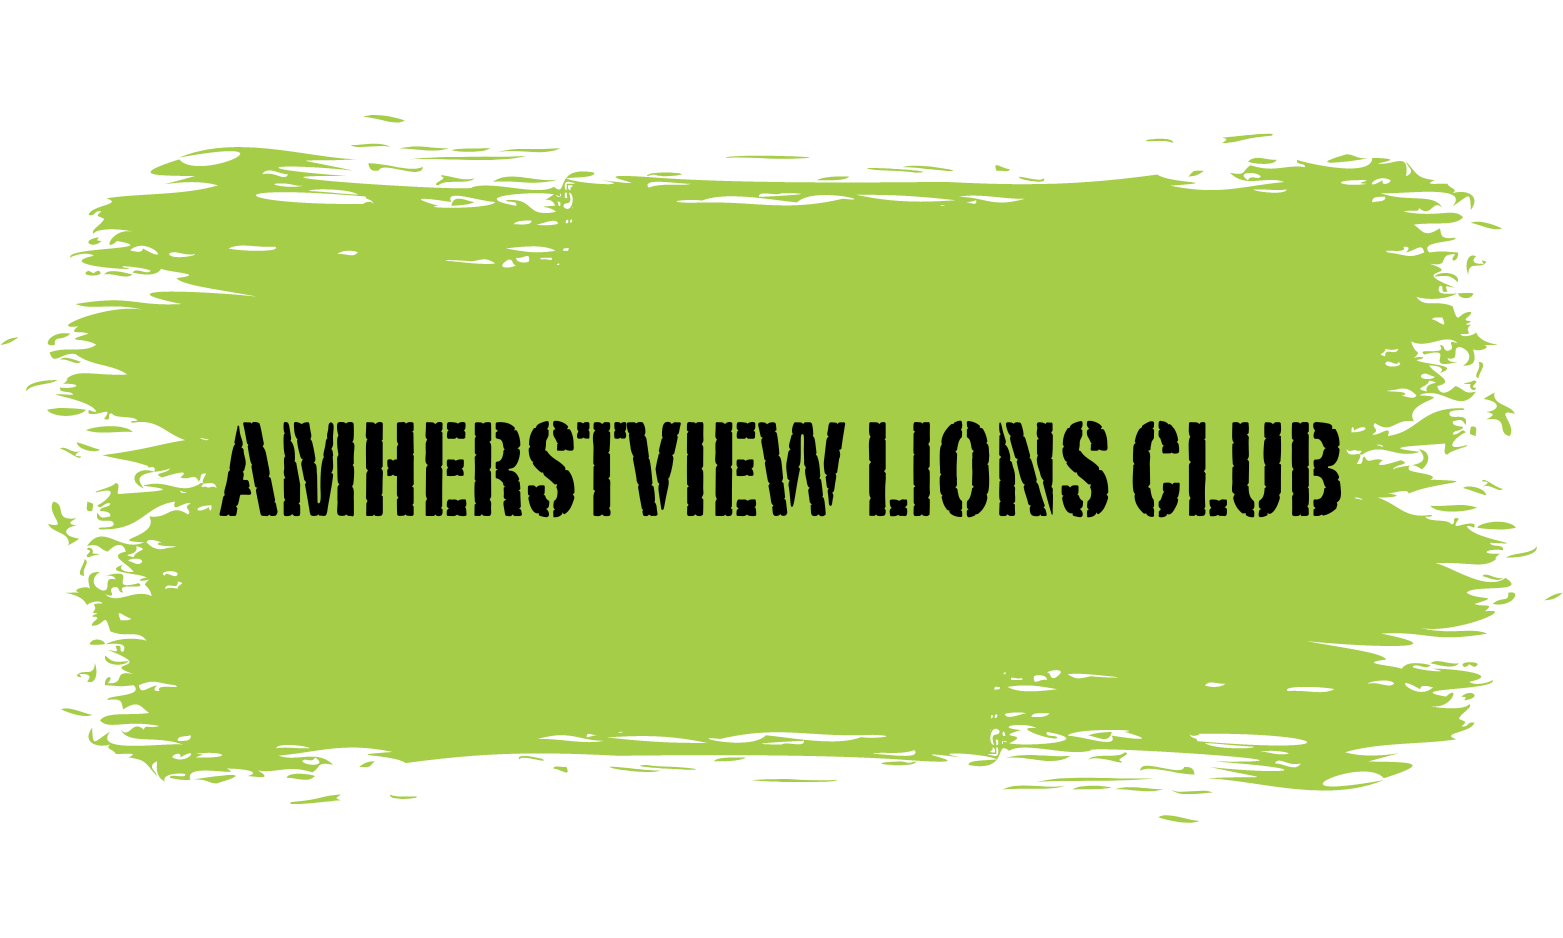 Amherstview Lions club